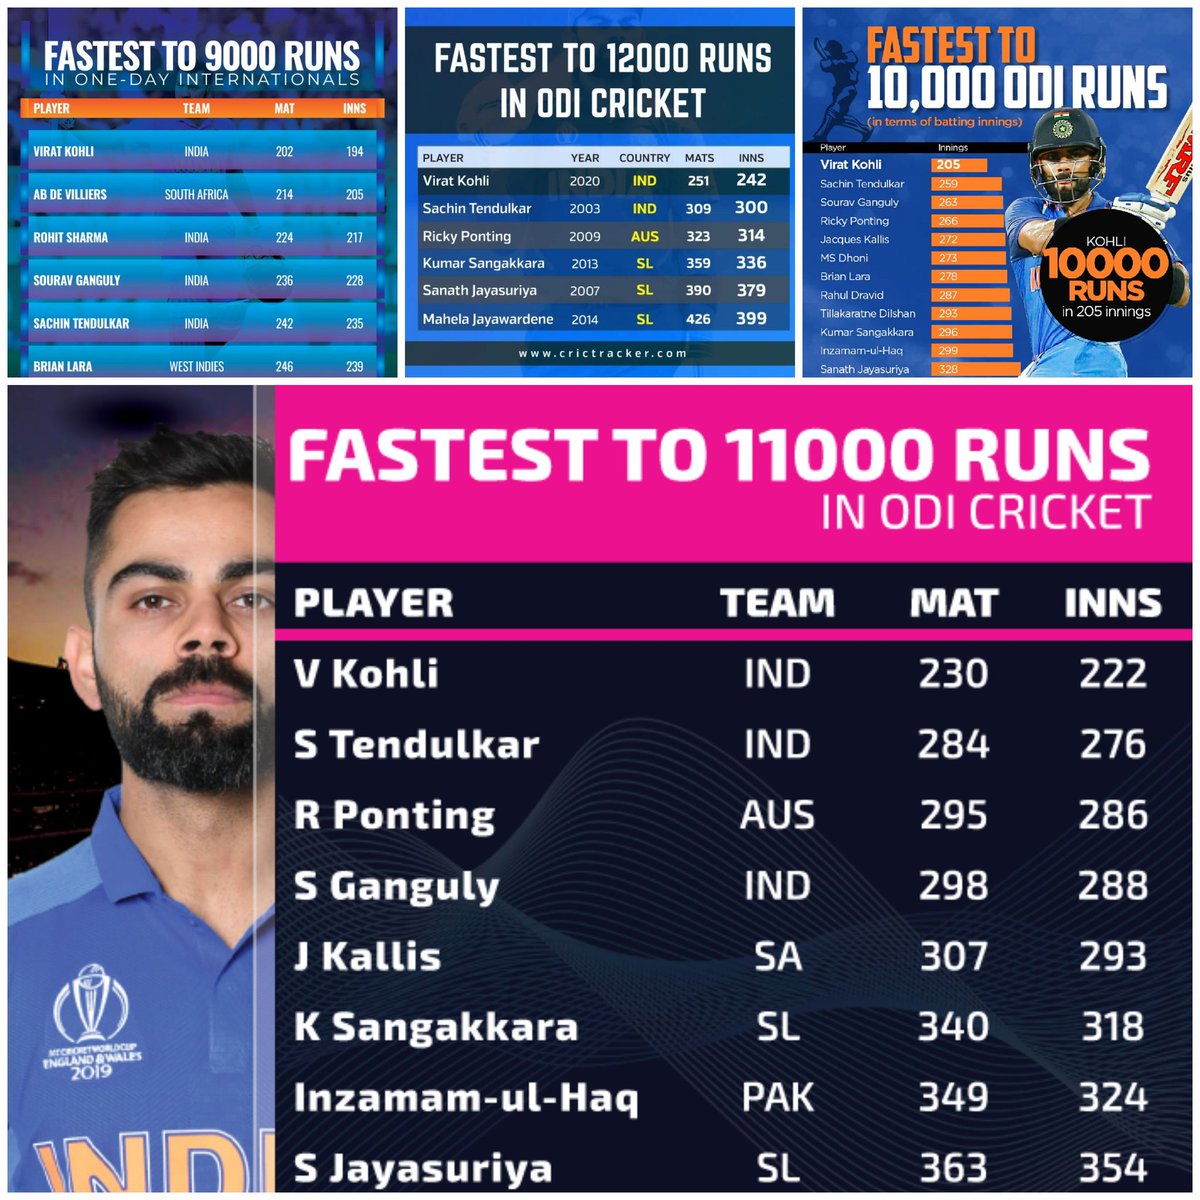 1.Fastest to 8k ODI runs in 175 innings. 2.Fastest to 9k ODI runs in 194 innings. 3.Fastest to 10k ODI runs in 205 innings.4.Fastest to 11k ODI runs in 222 innings.